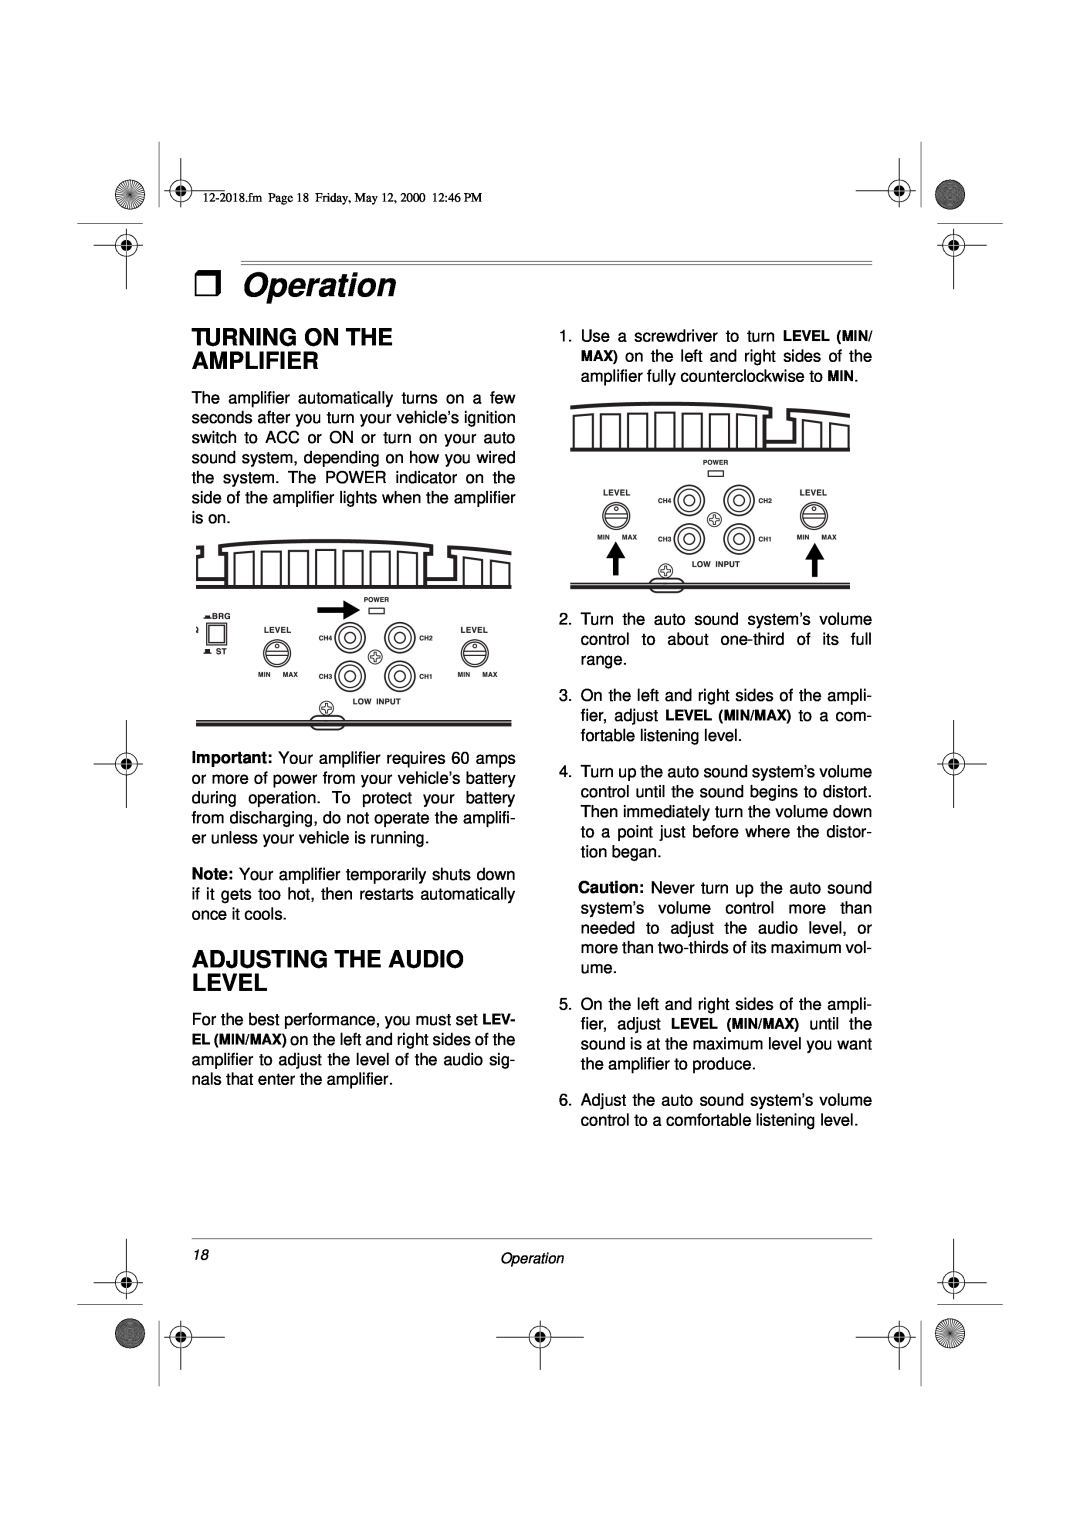 Radio Shack XL-400 owner manual ˆOperation, Turning On The Amplifier, Adjusting The Audio Level 